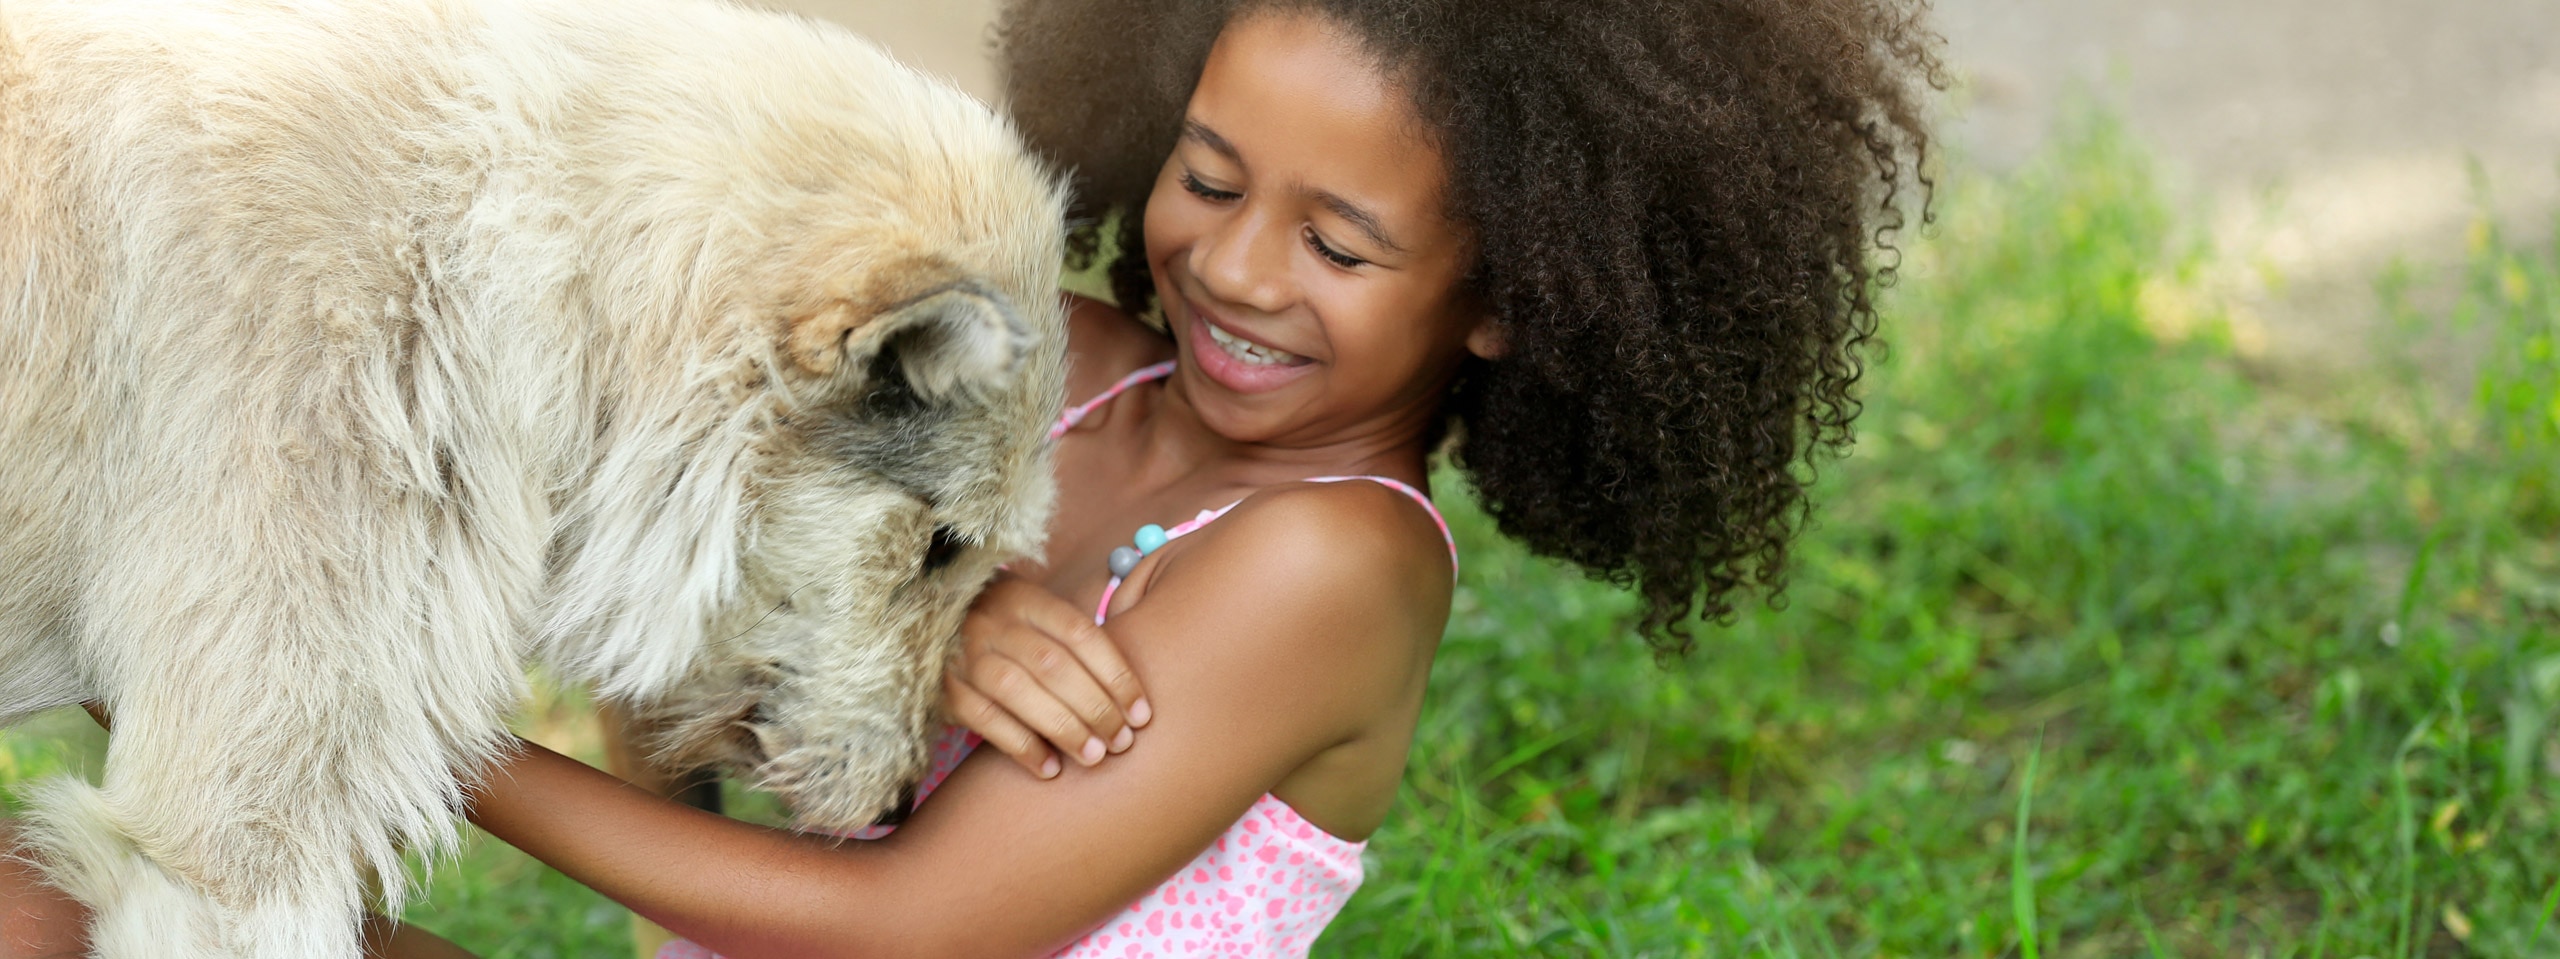 Is Pest Control Safe Around Children and Pets?